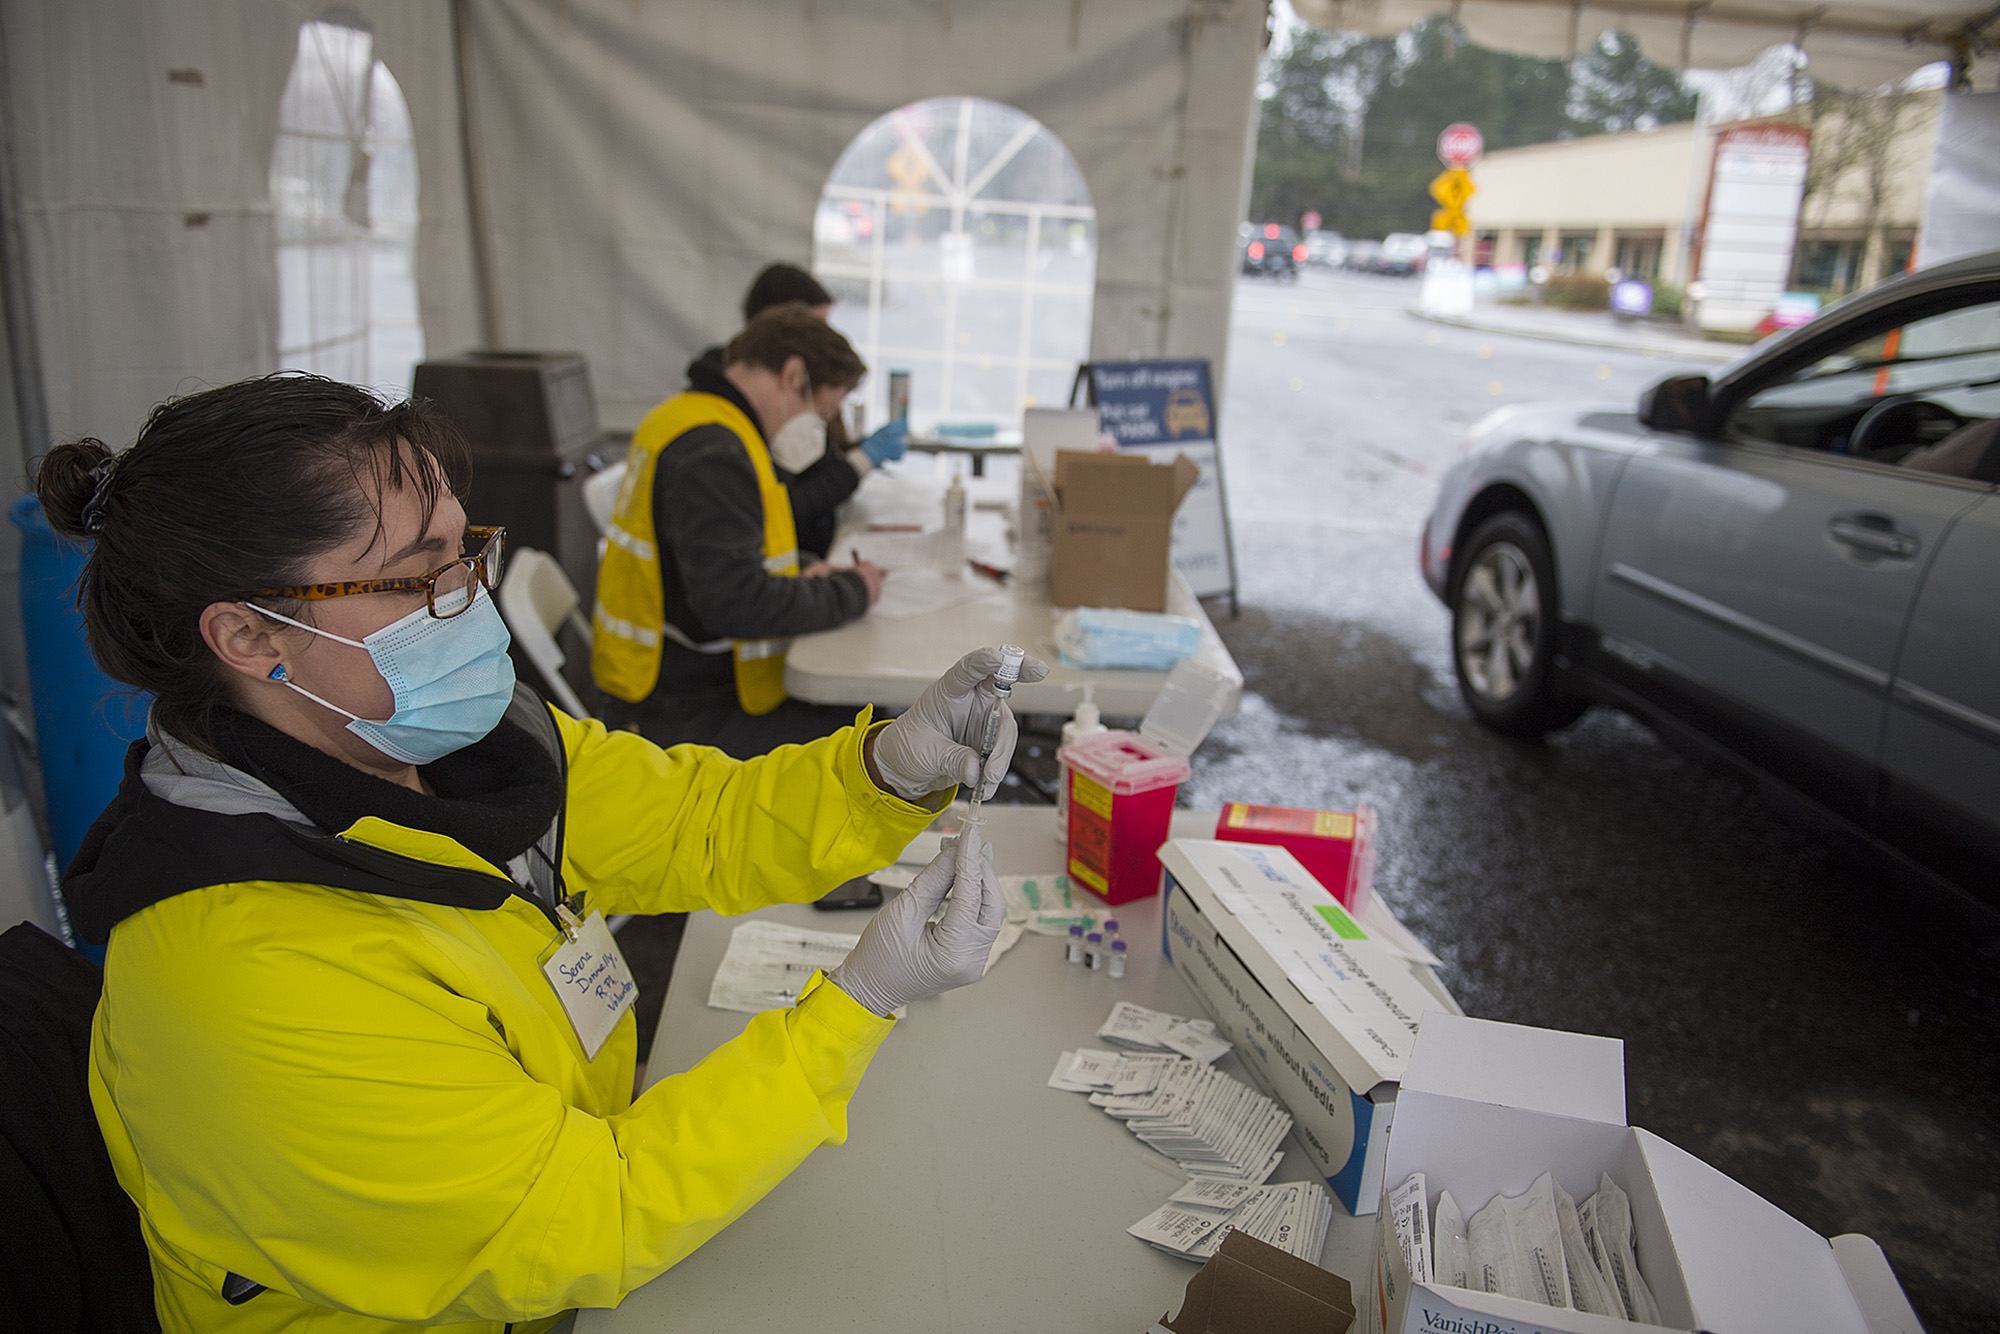 Volunteer pharmacist Serena Donnelly, left, prepares a dose of COVID-19 vaccine while working behind-the-scenes at the new large-scale vaccination site at Tower Mall on Friday morning, March 5, 2021. The vaccinations are by appointment only.